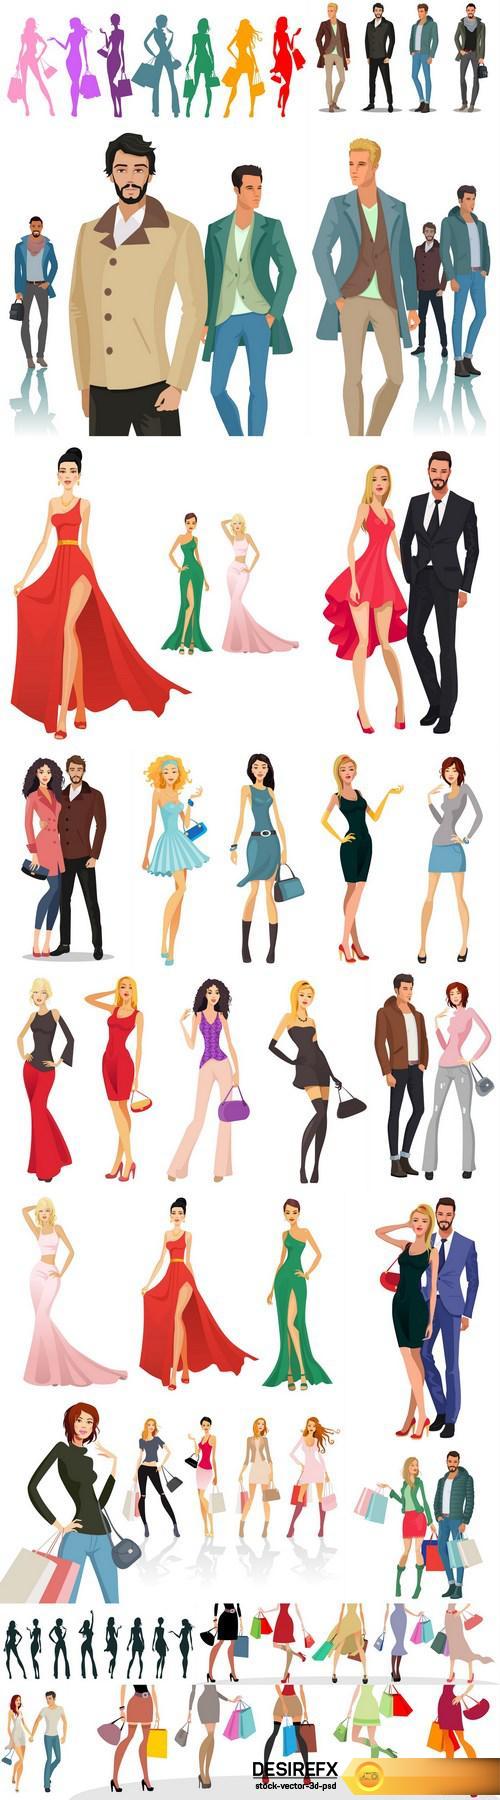 Female and male - Fashion & shopping - 18xEPS Vector Stock